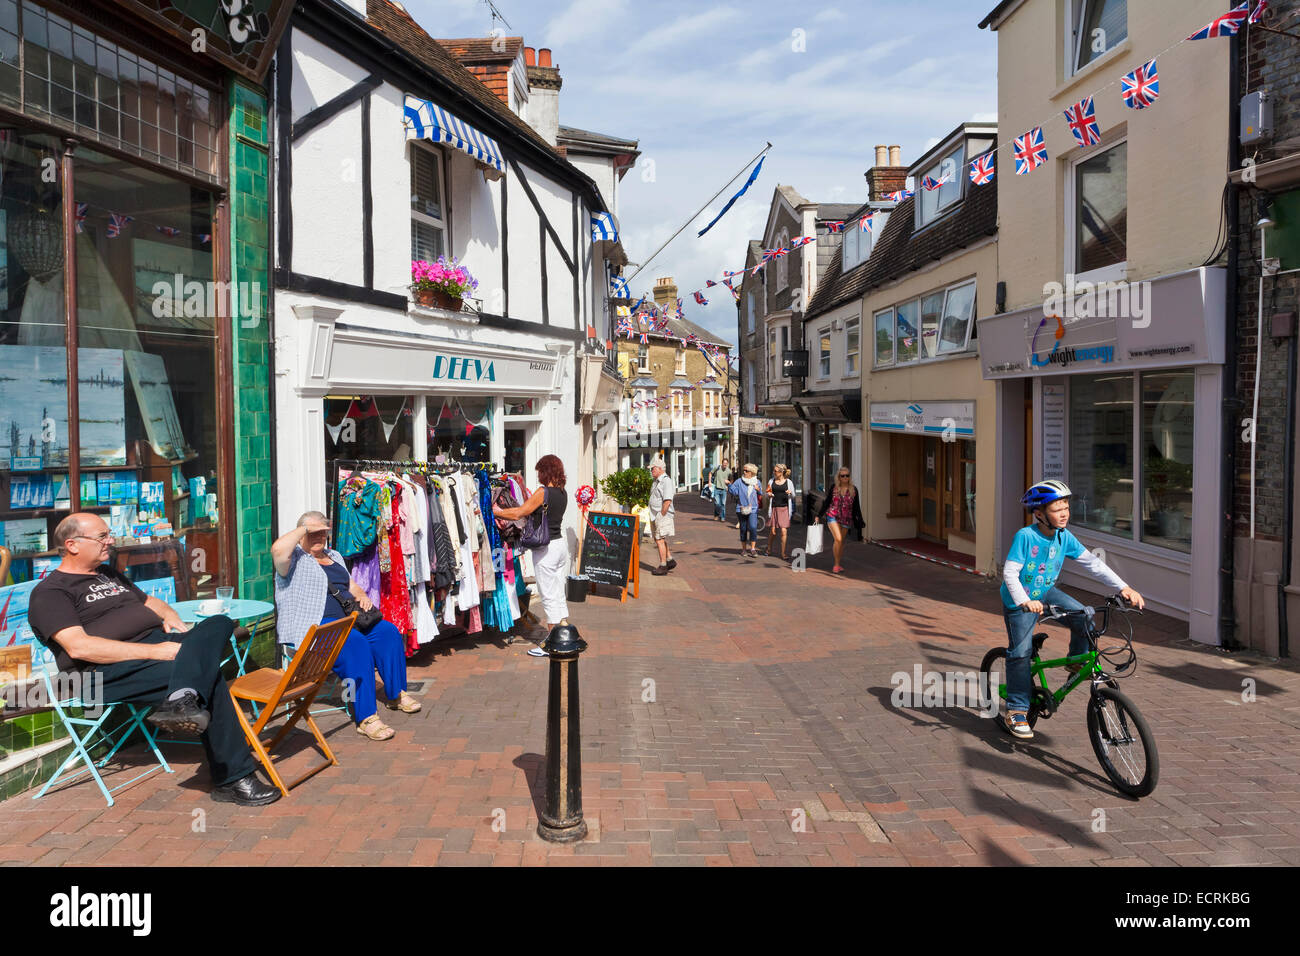 SHOPS AT THE PEDESTRIAN AREA OF COWES, ISLE OF WIGHT, ENGLAND, GREAT BRITAIN Stock Photo